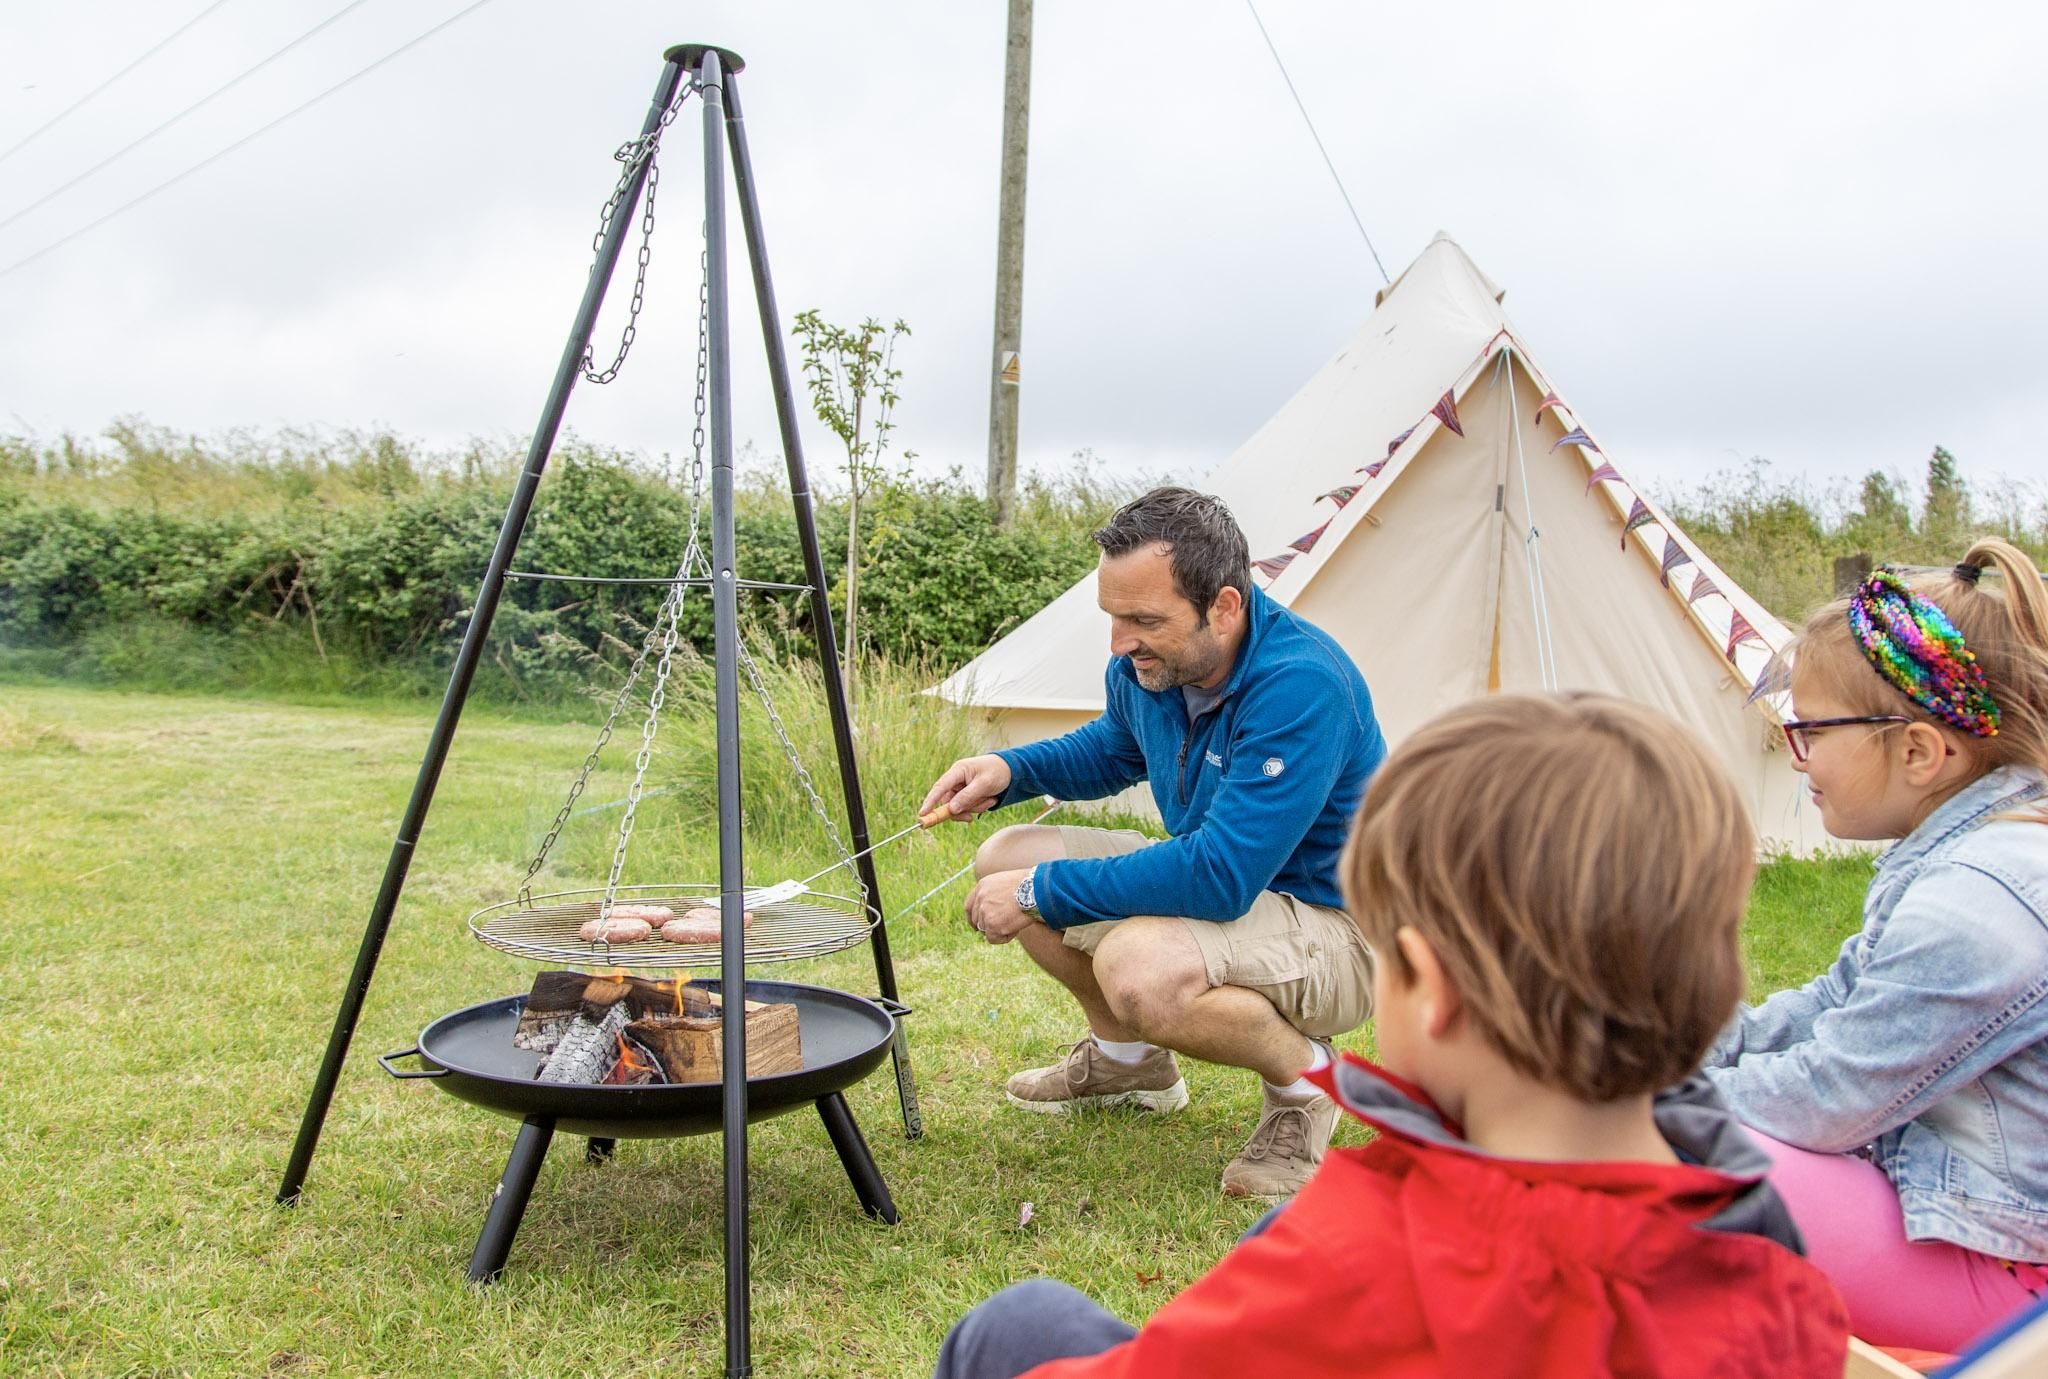 Camping hunstanton: Cooking sausages on a campfire